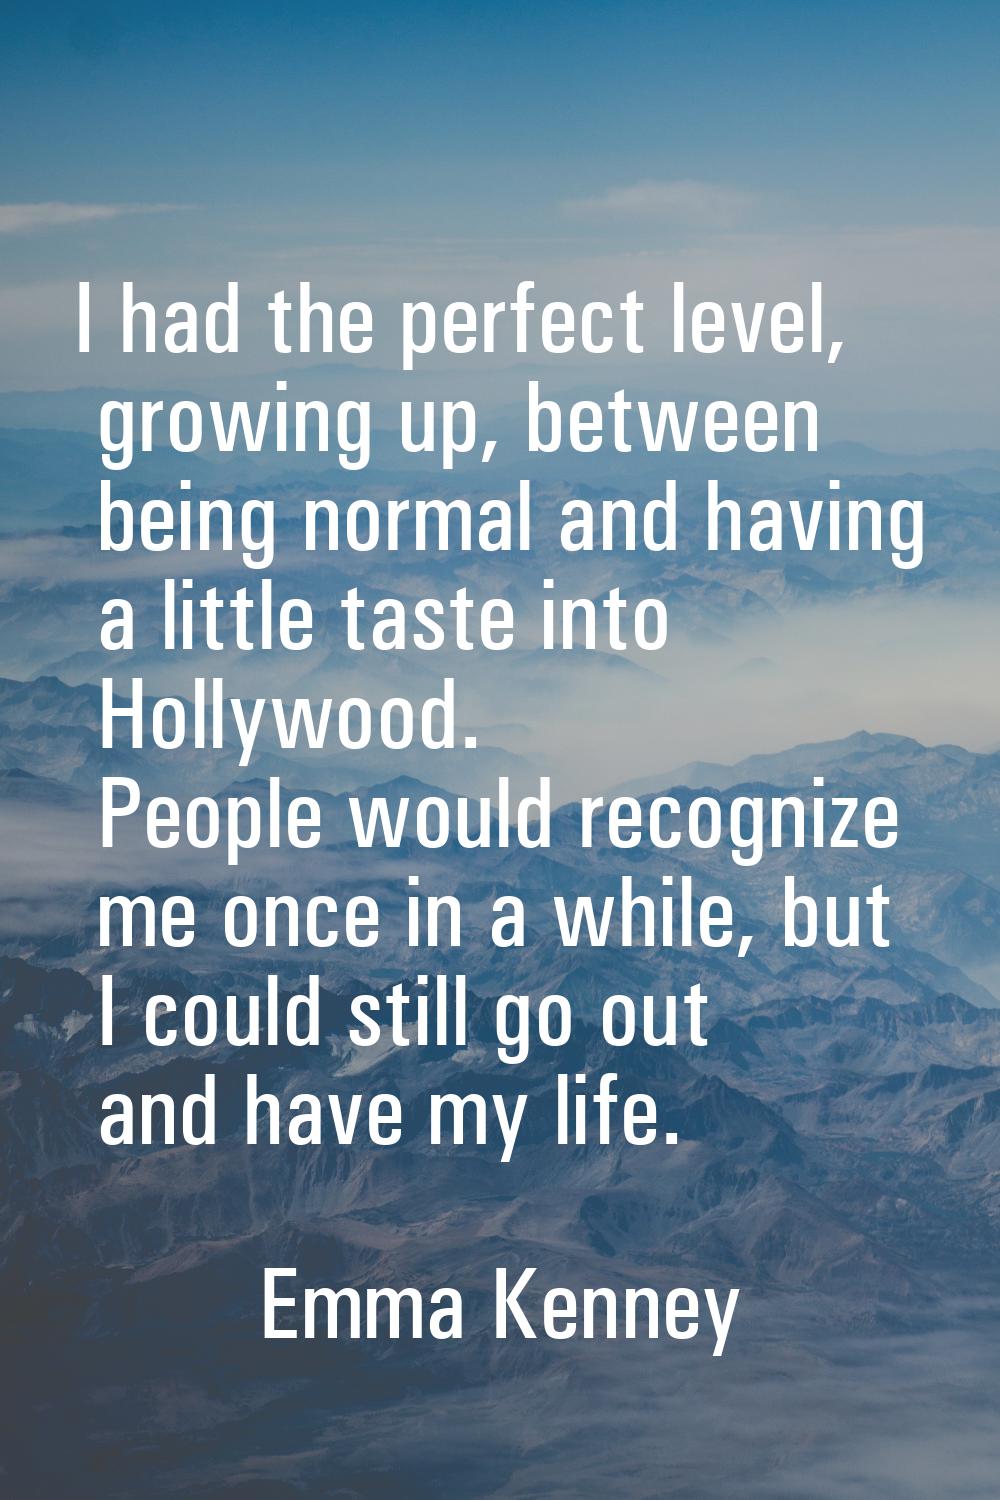 I had the perfect level, growing up, between being normal and having a little taste into Hollywood.